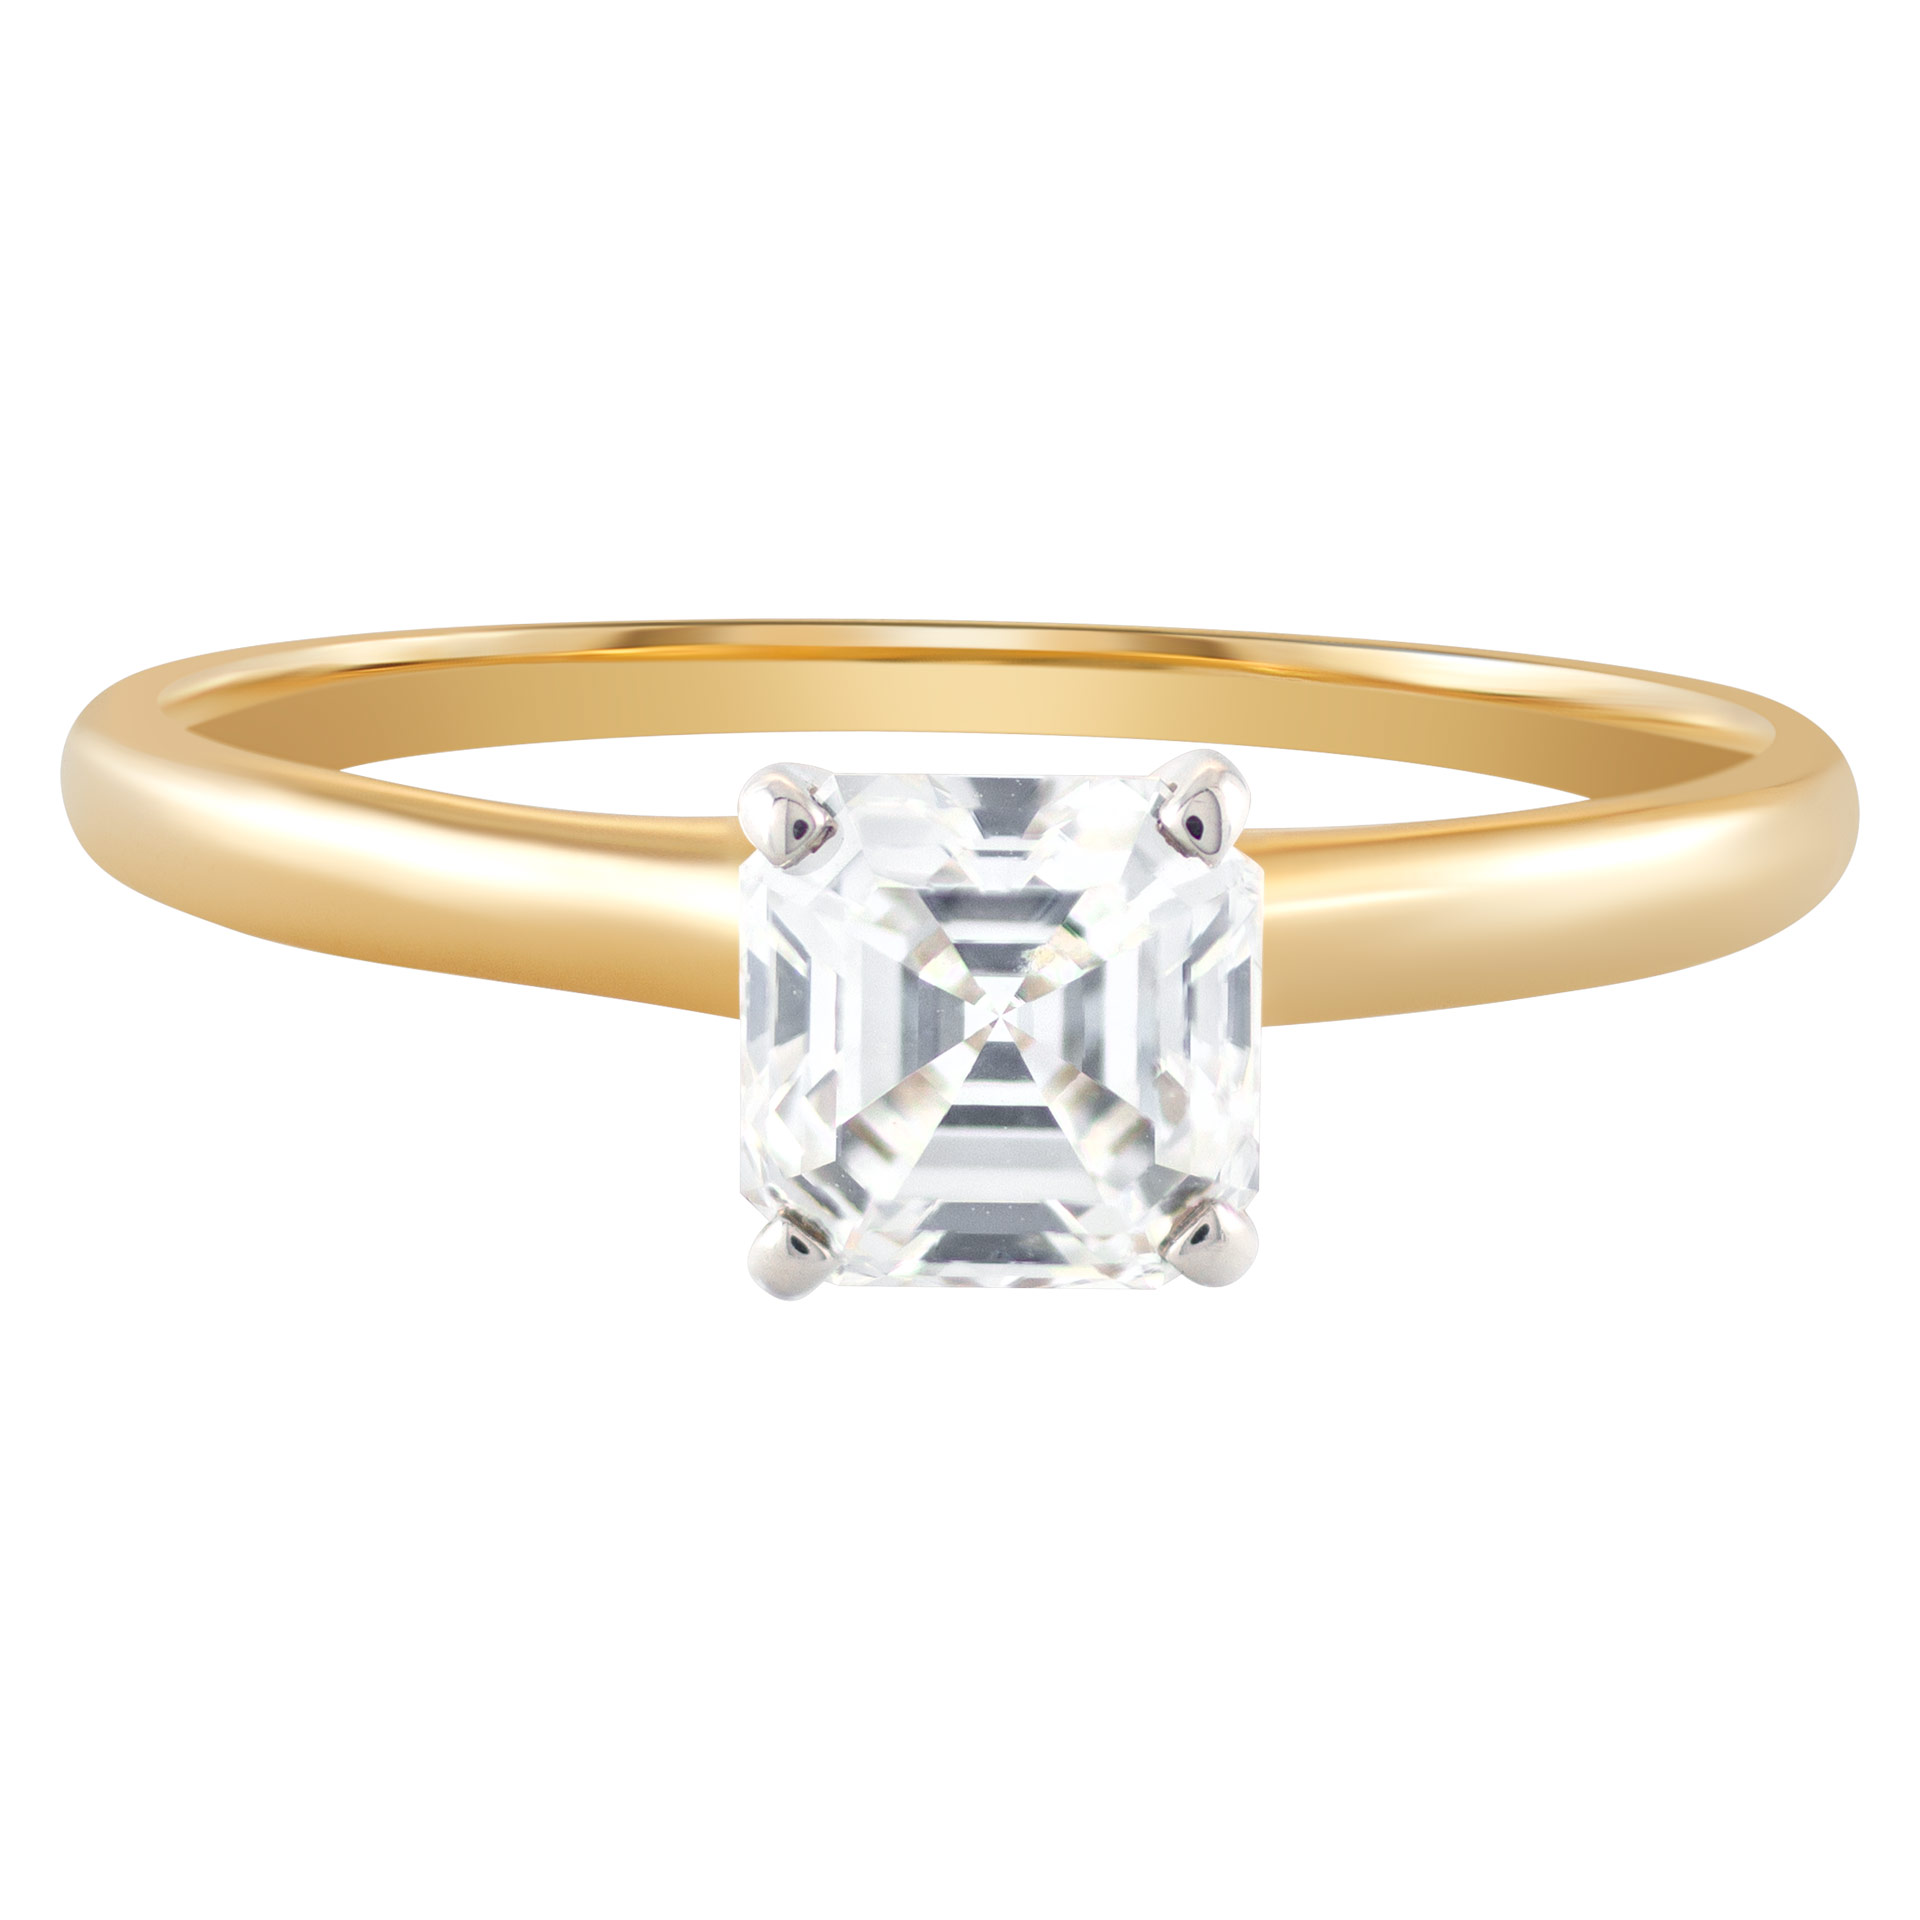 GIA Certified Emerald cut diamond 1.08 cts (J Color, VS1 Clarity) solitaire ring set in 14k yellow gold. Size 9.5 image 1